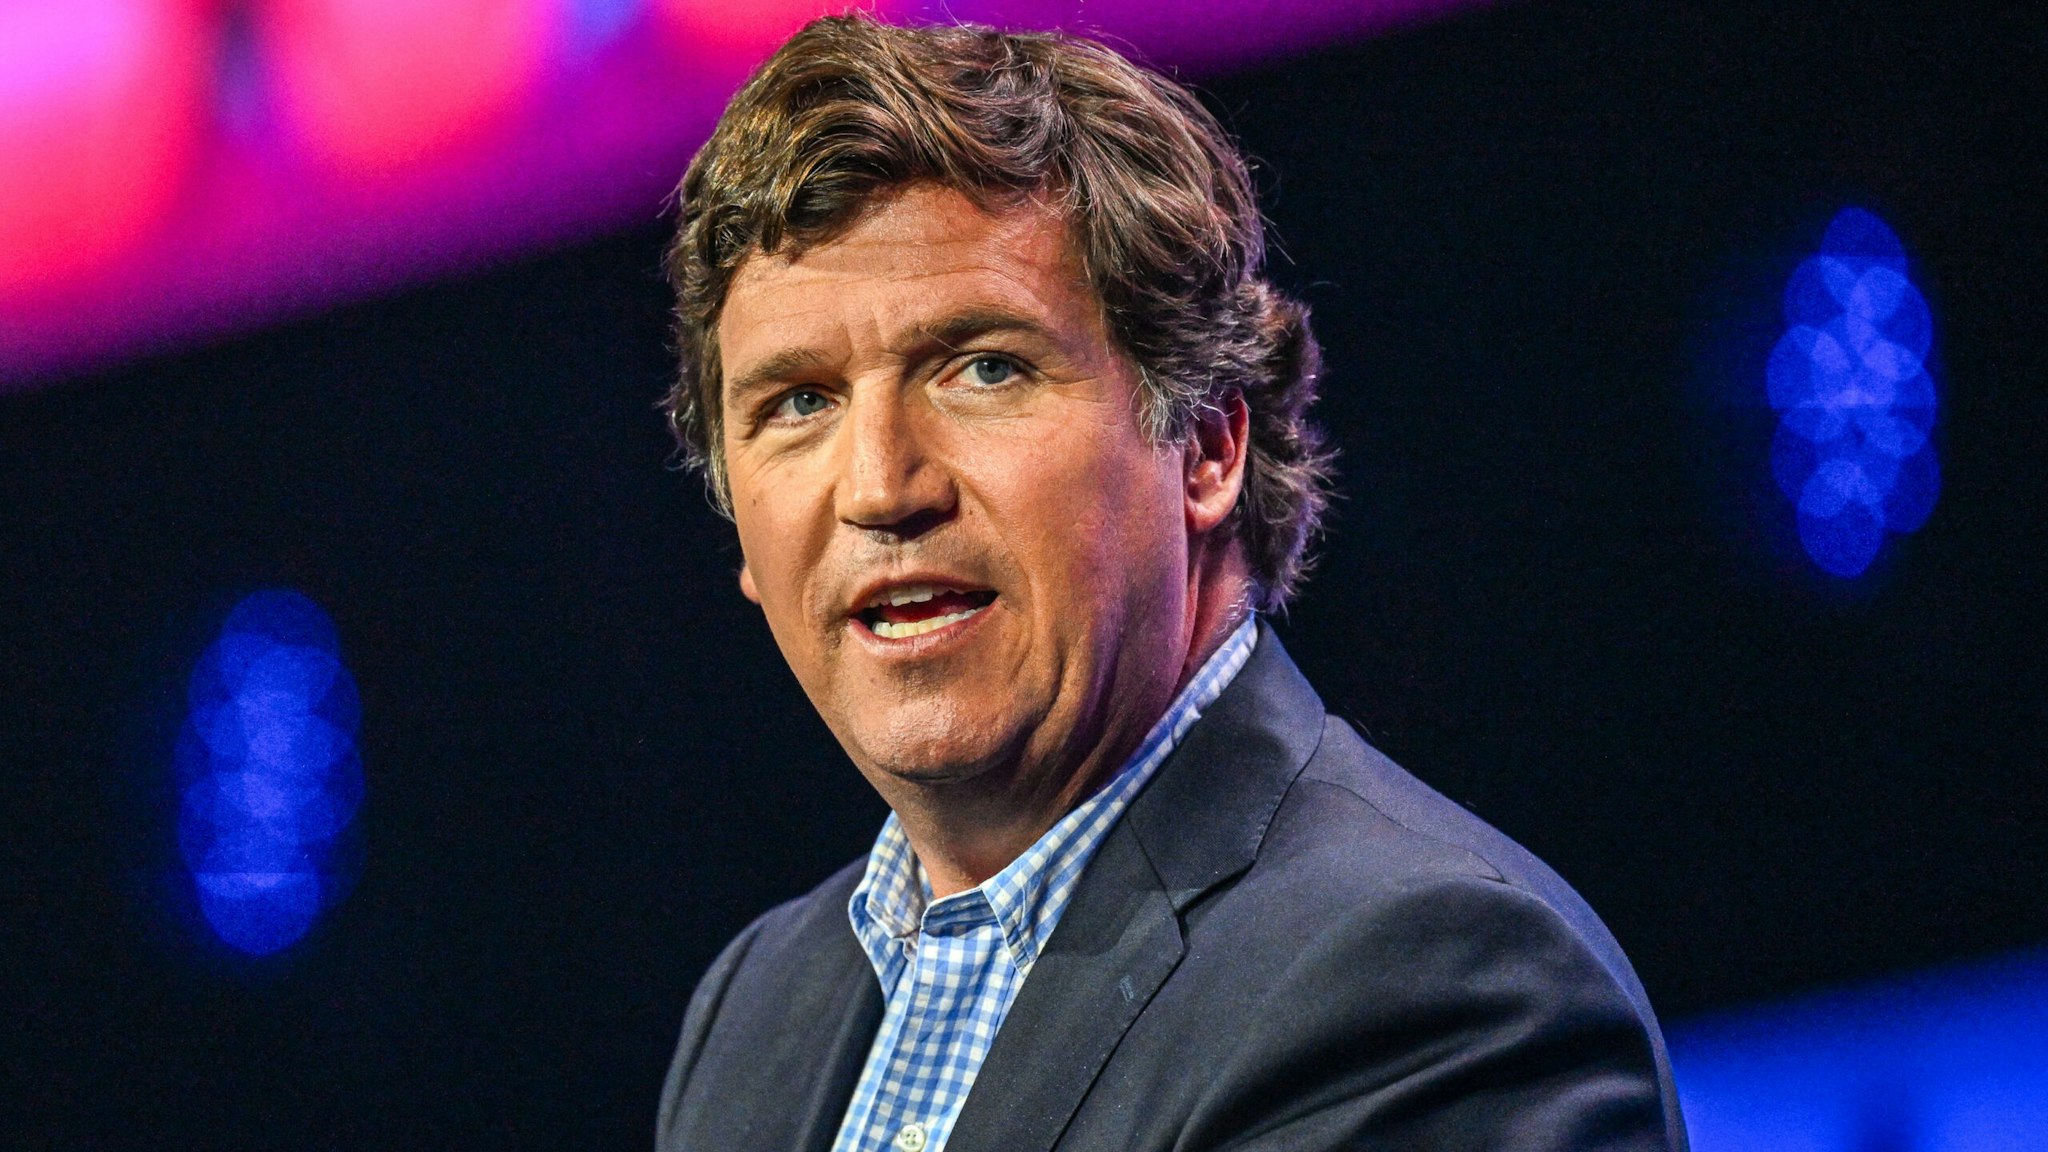 US conservative political commentator Tucker Carlson speaks at the Turning Point Action USA conference in West Palm Beach, Florida, on July 15, 2023.